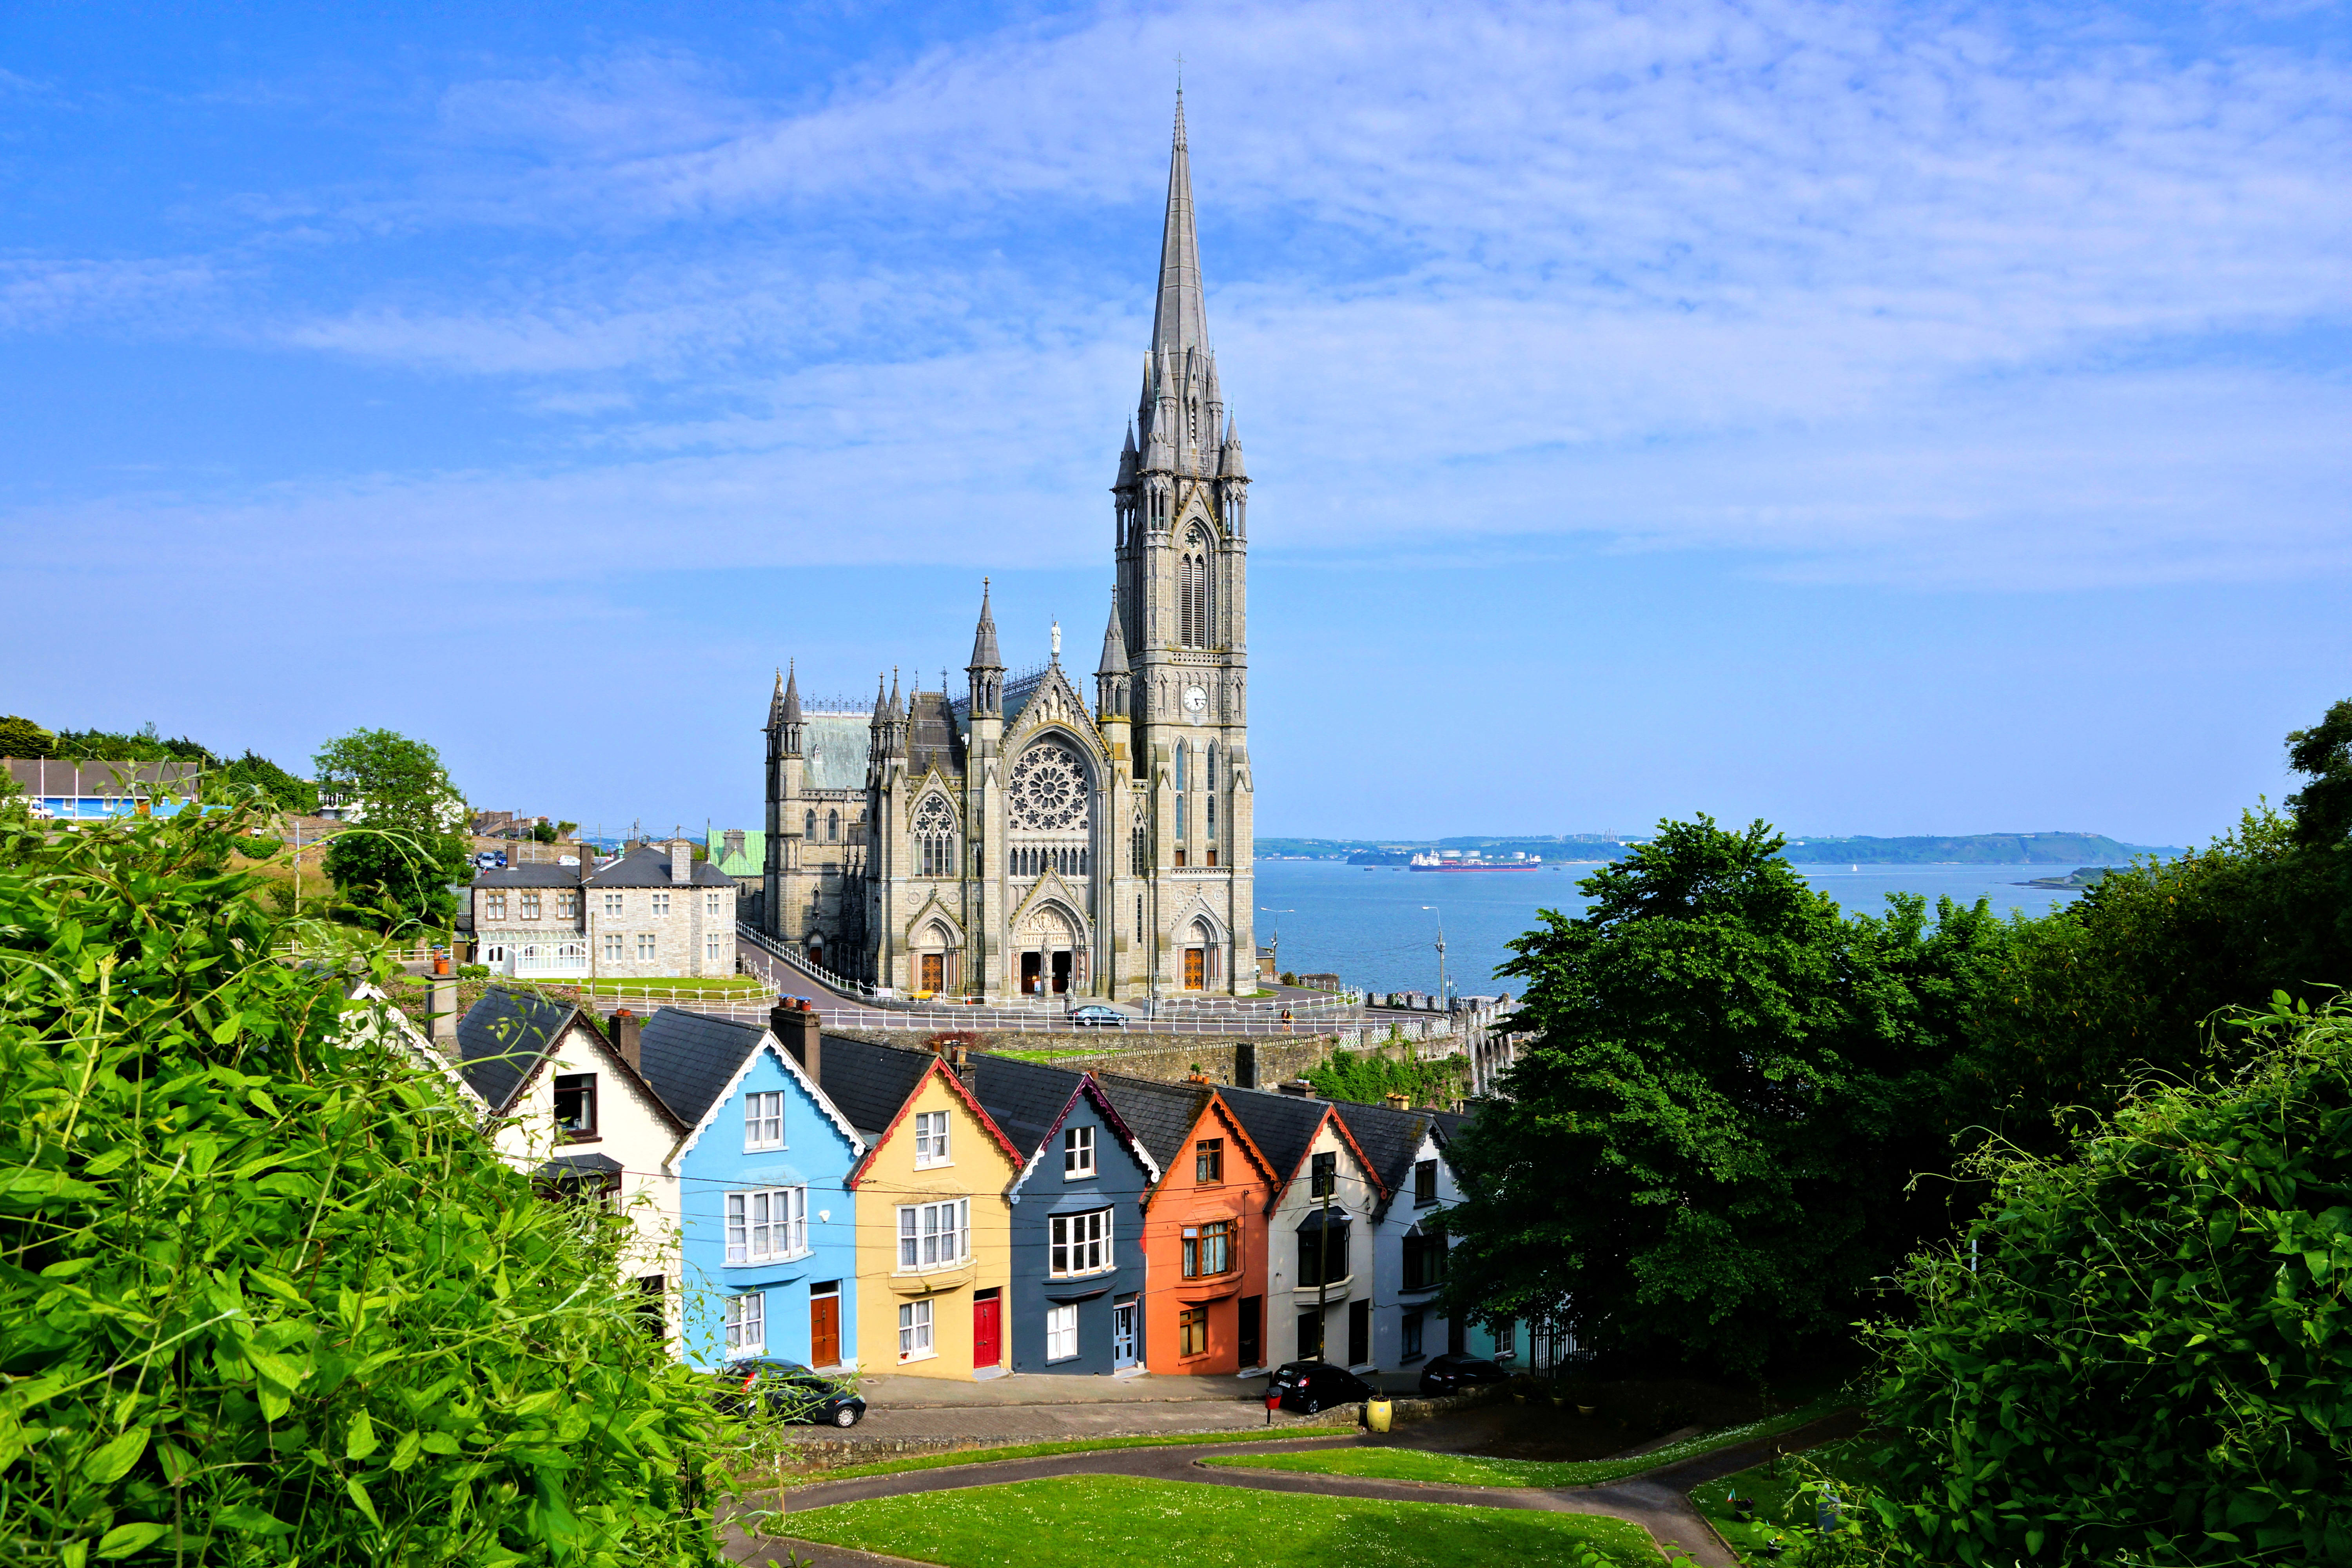 Colourful row houses with towering cathedral in background in the port town of Cobh